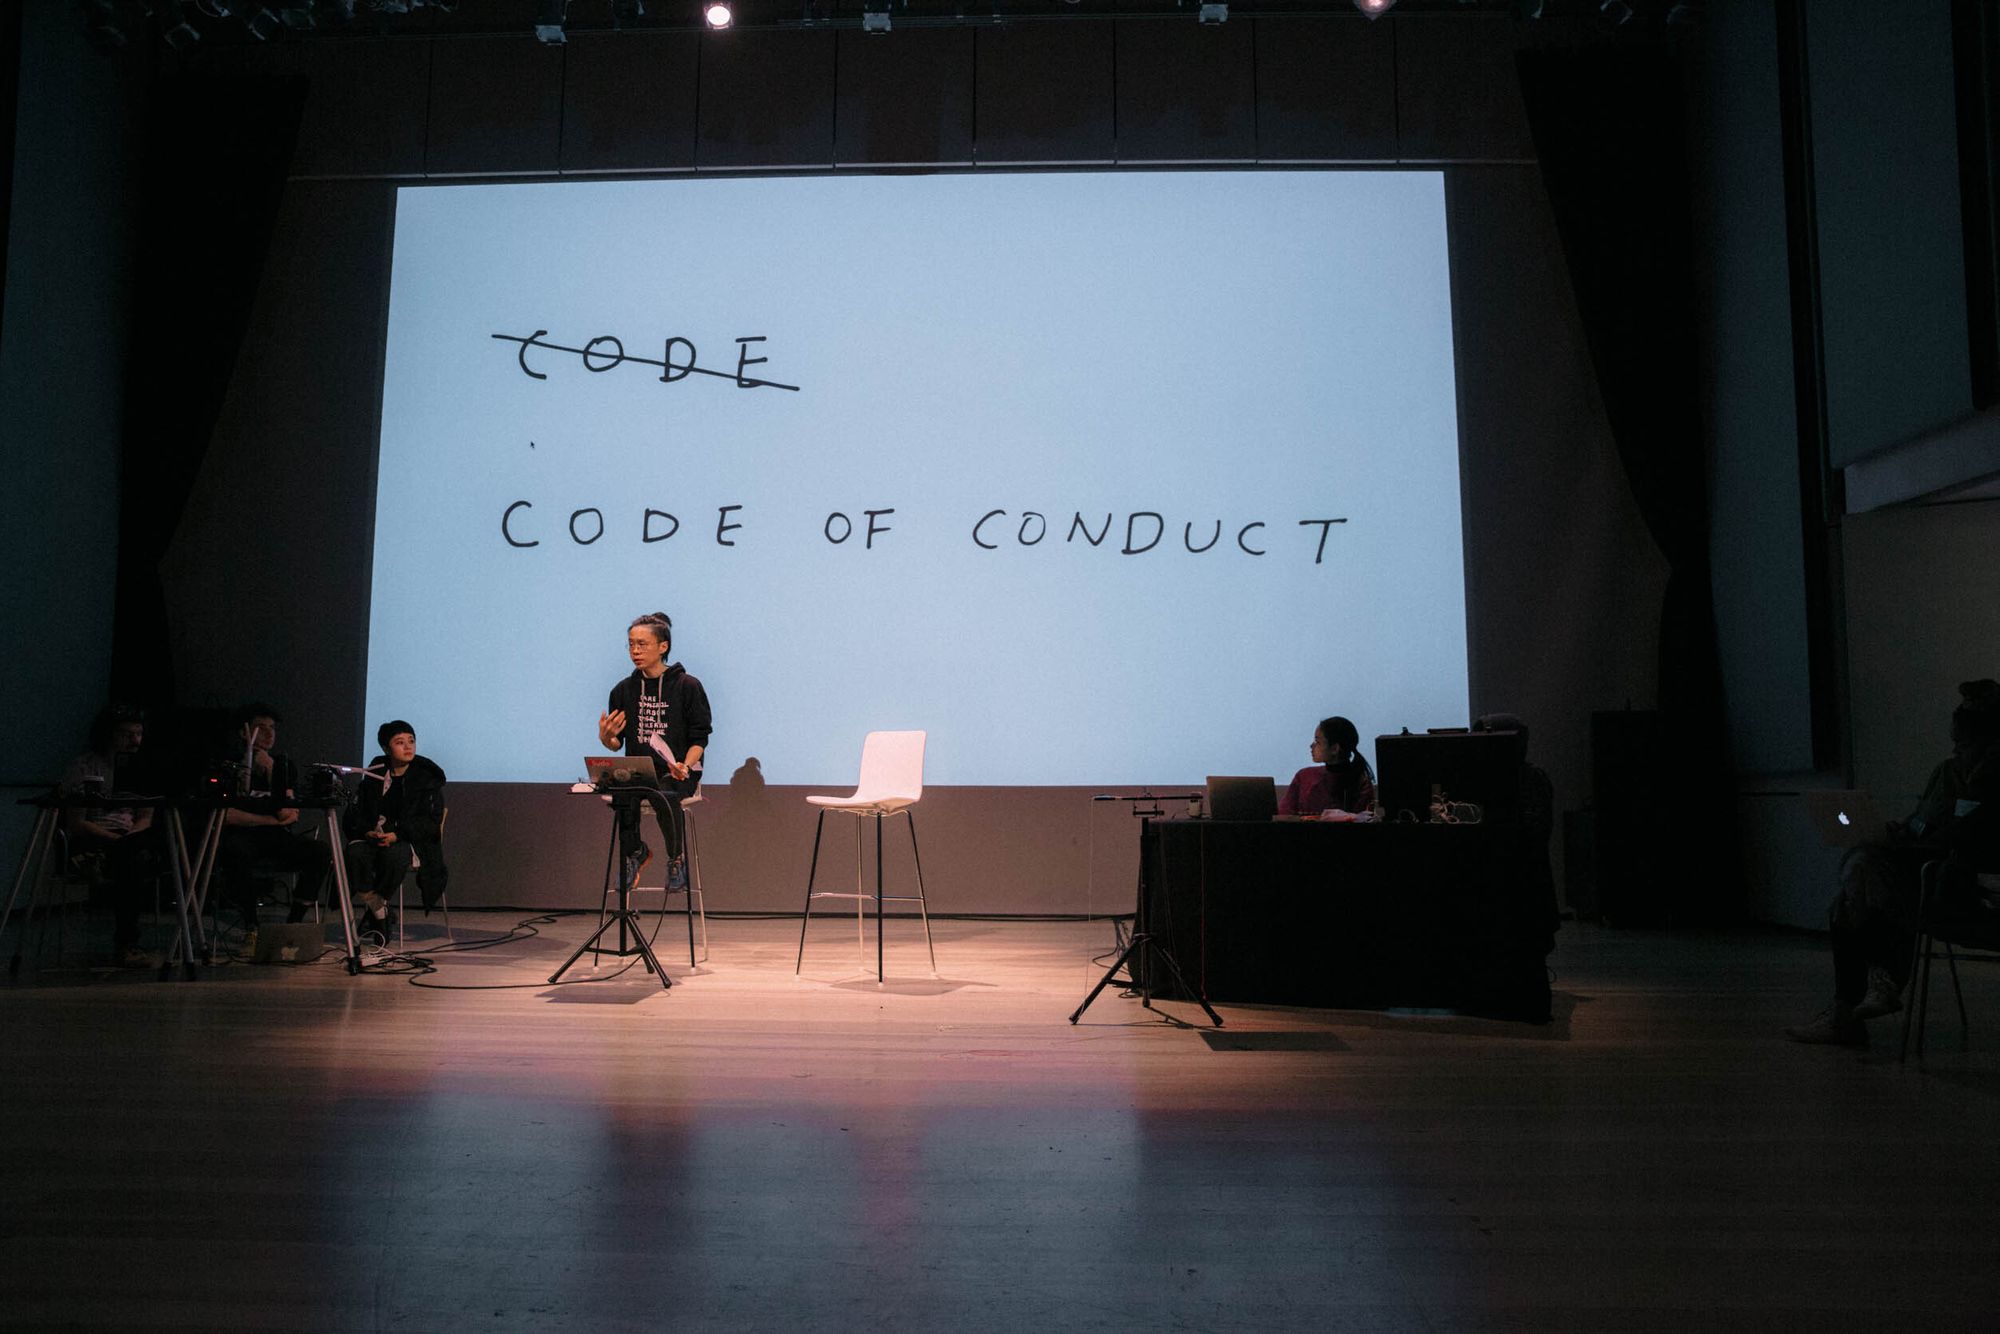 Taeyoon is spotlit and wearing a black sweatshirt, sitting on a chair that's on a stage. Behind him, a large screen shows a handwritten images where the word "code" is crossed out, and "code of conduct" is written below.